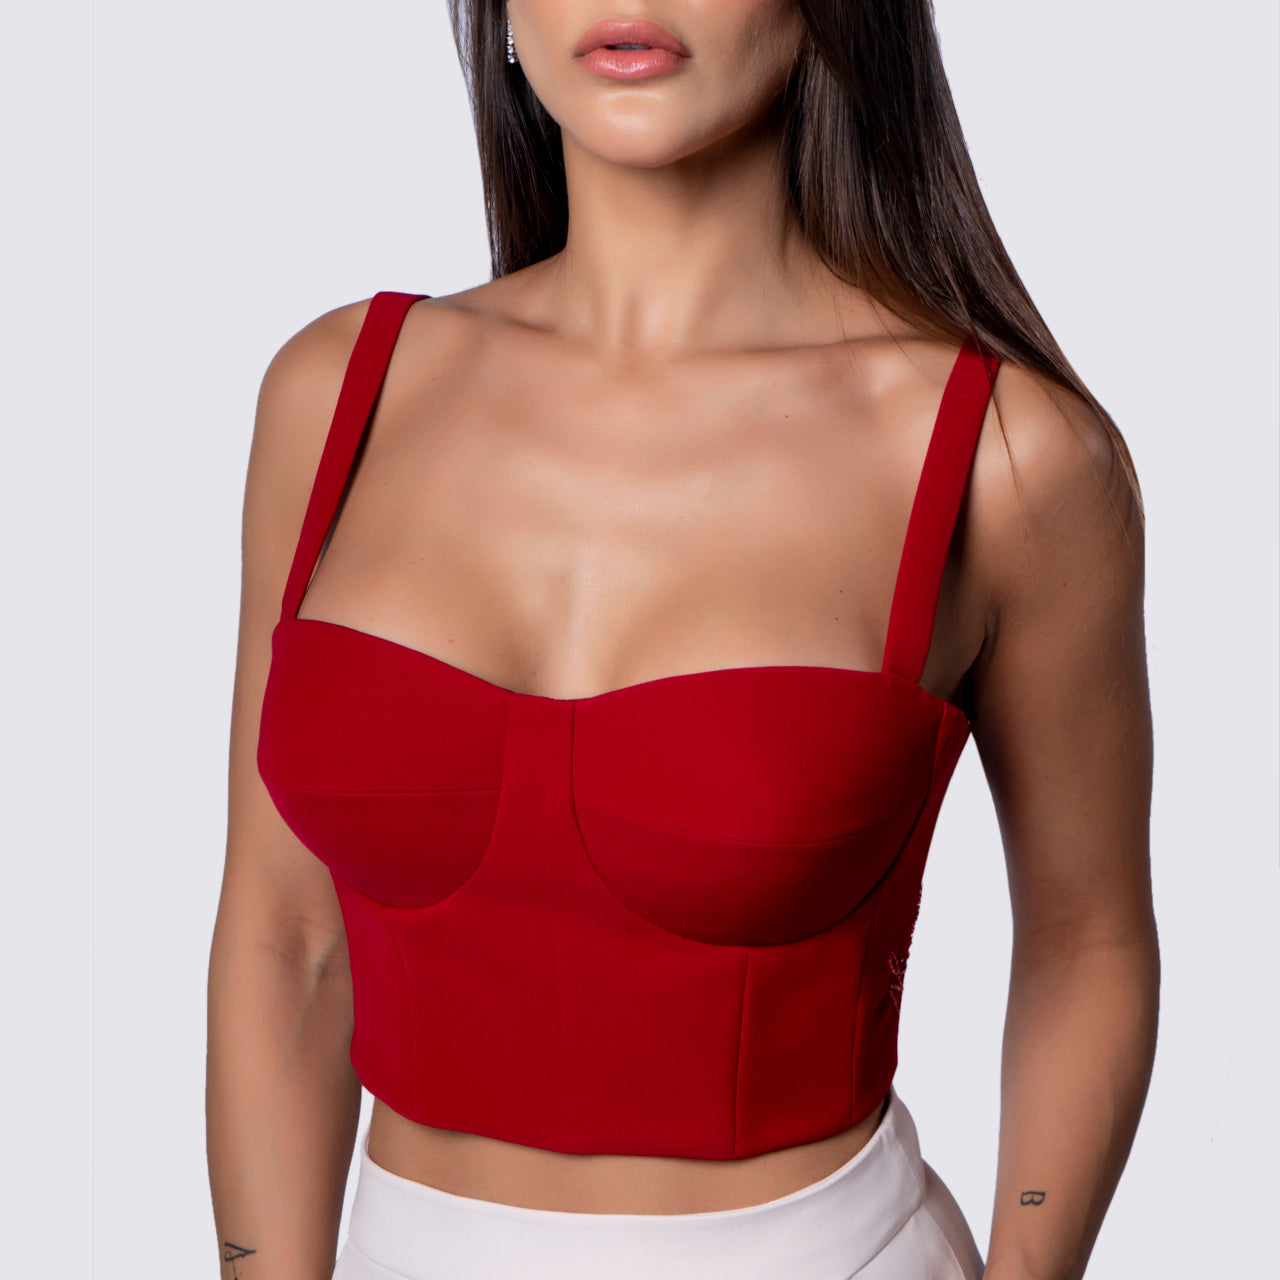 Bustier, New Trends Collection Online